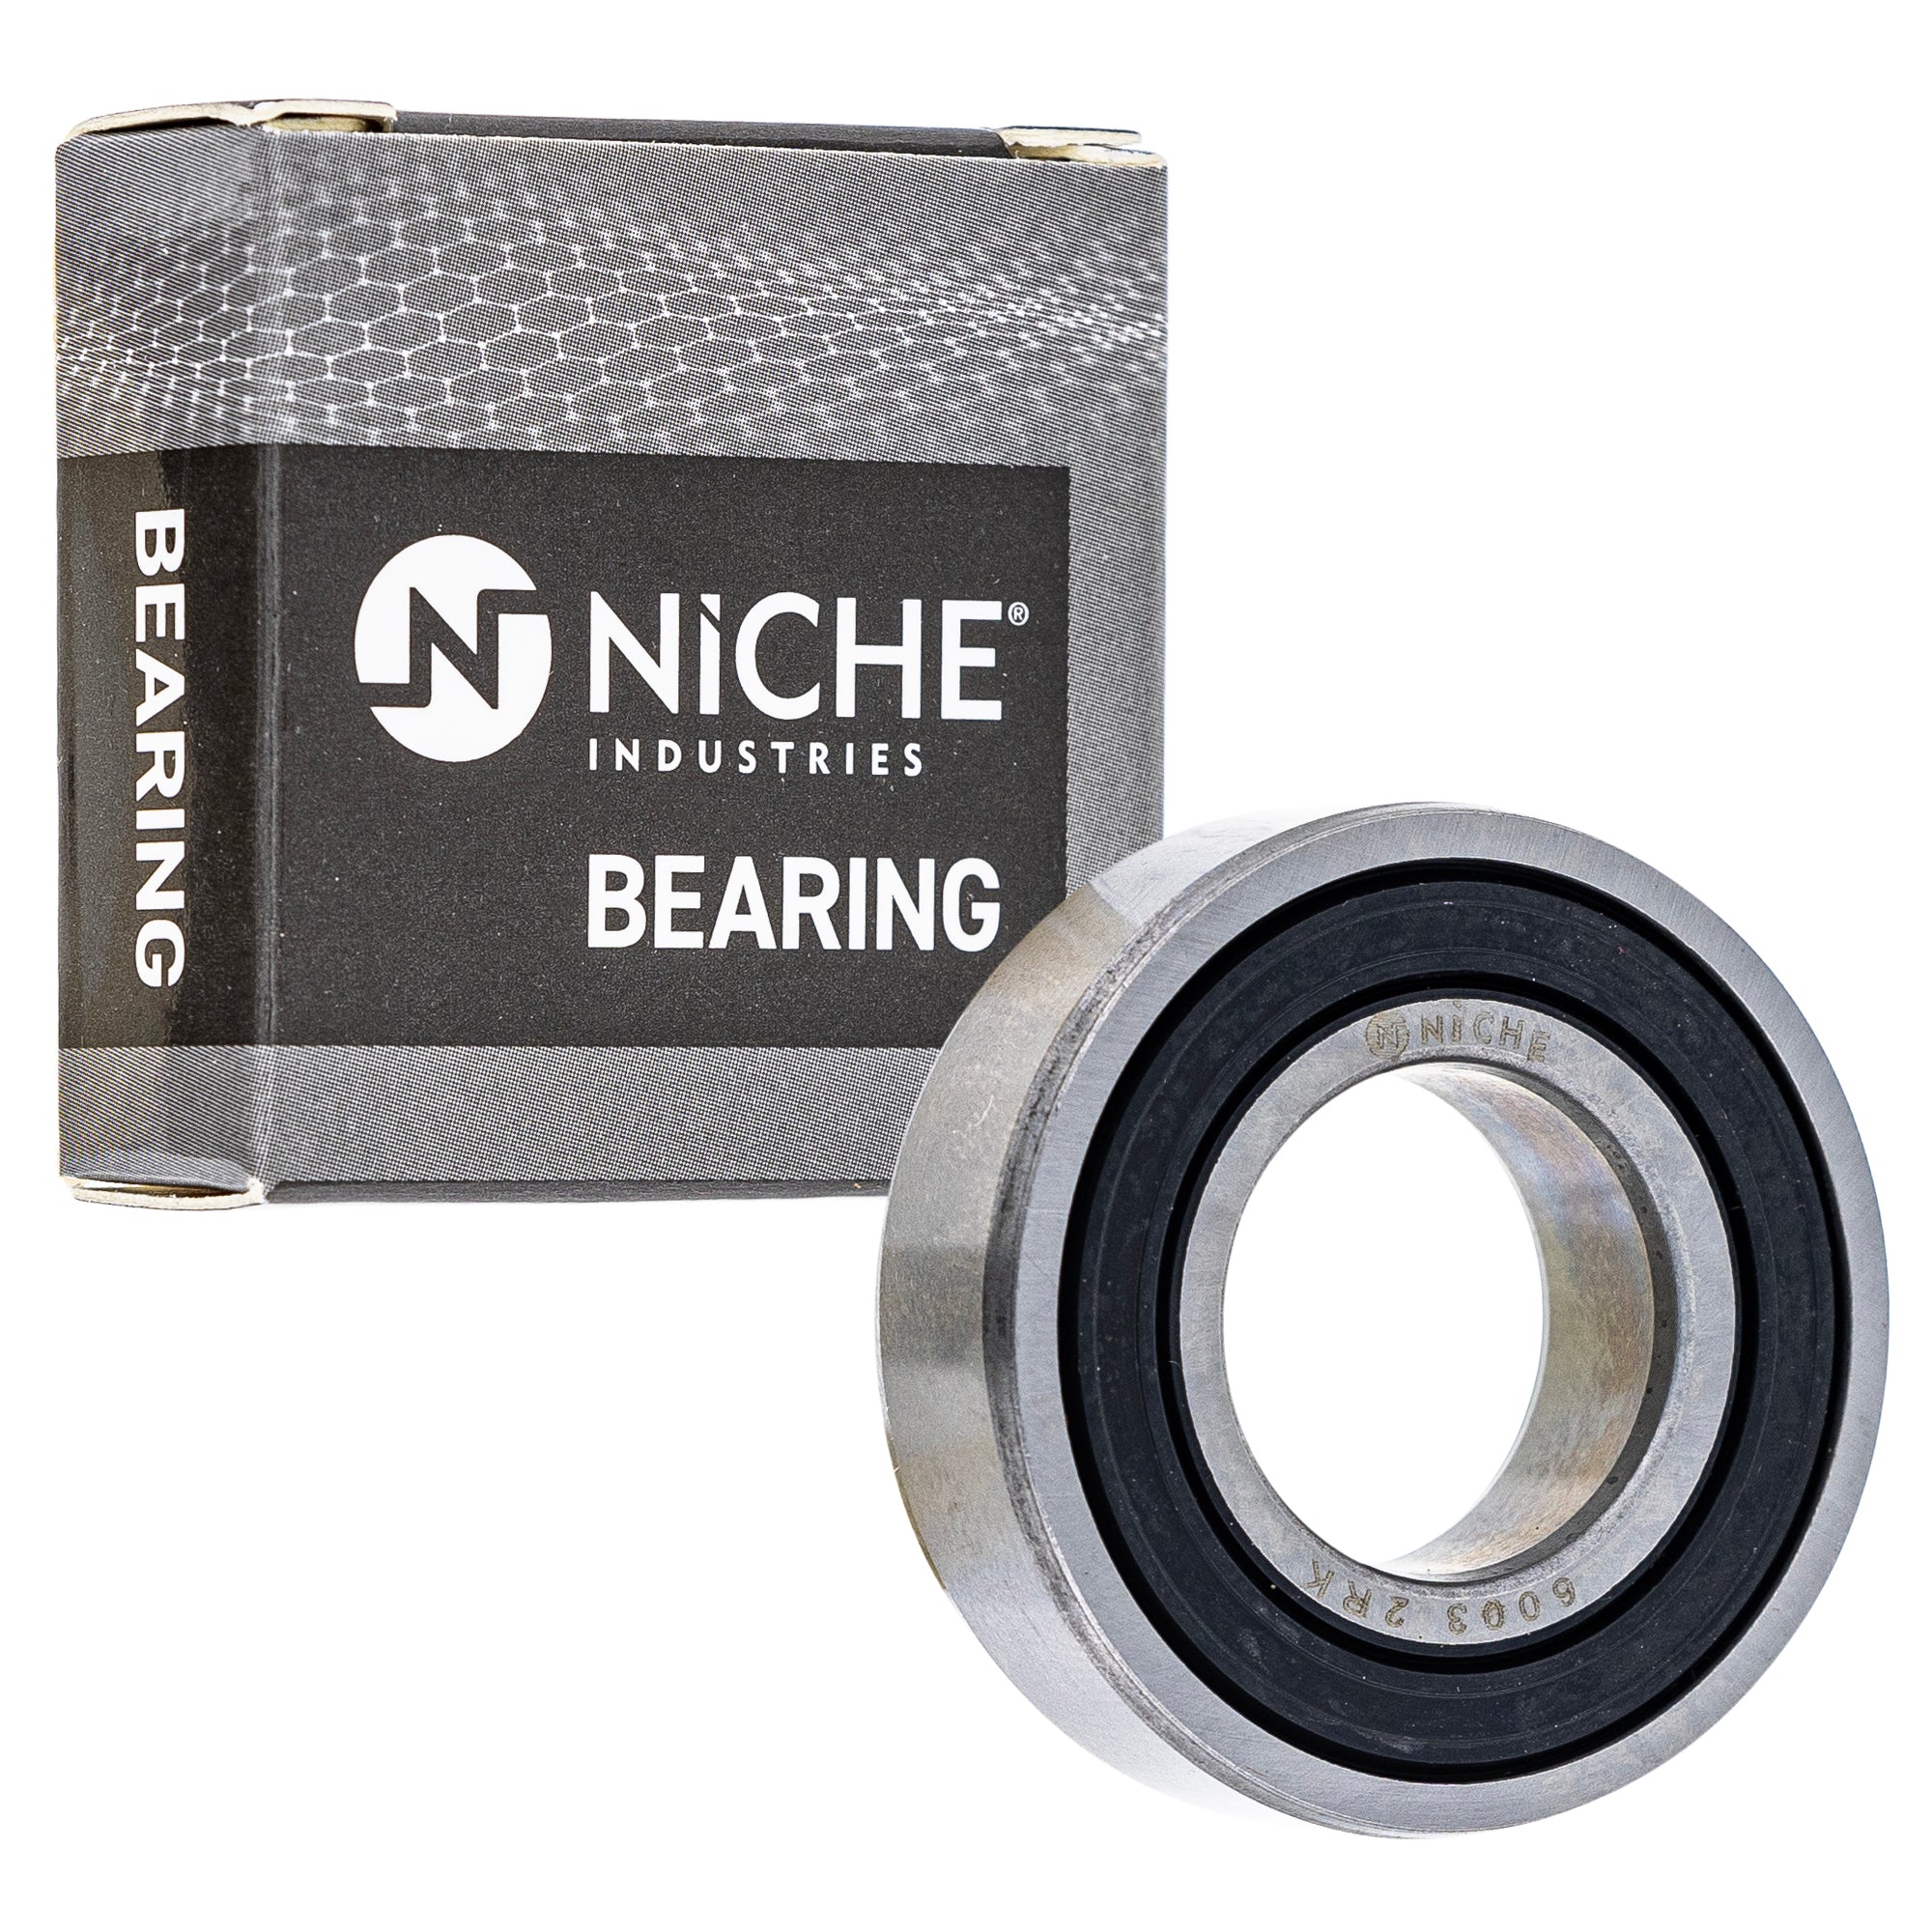 NICHE 519-CBB2325R Bearing 2-Pack for zOTHER Arctic Cat Textron YZ250